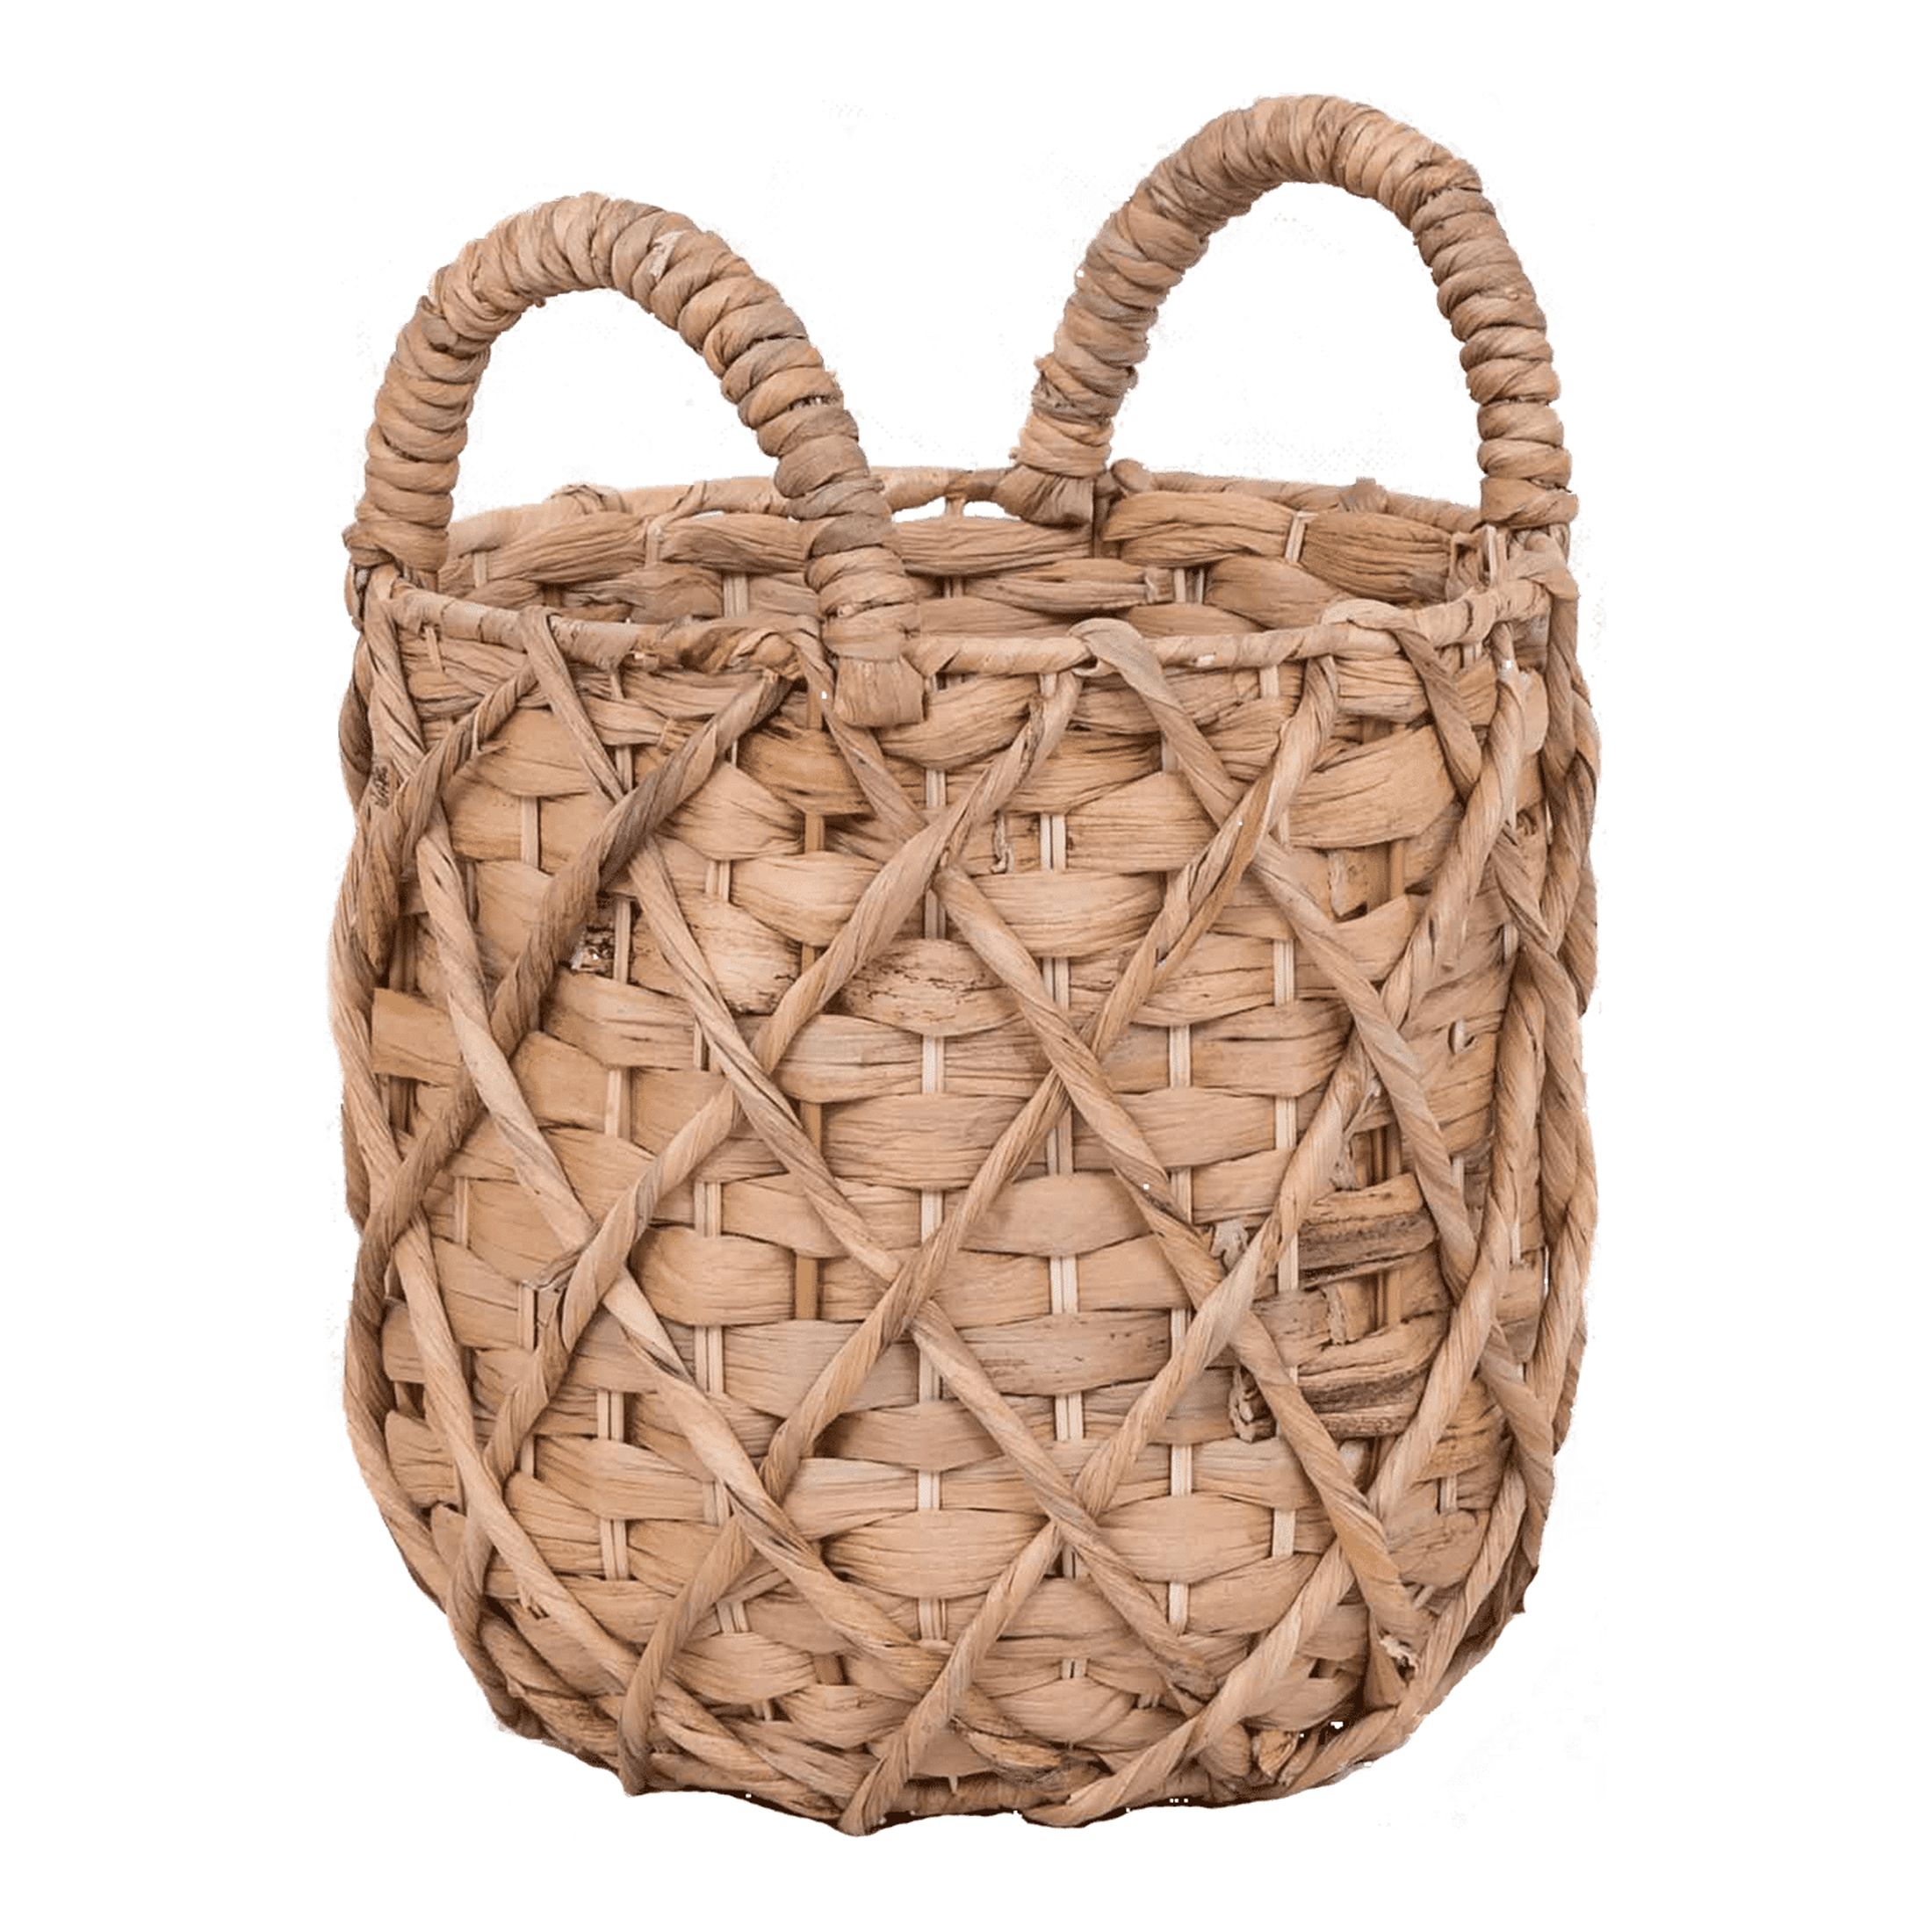 Better Homes & Gardens 11" Round Natural Water Hyacinth Basket Planter - image 2 of 5